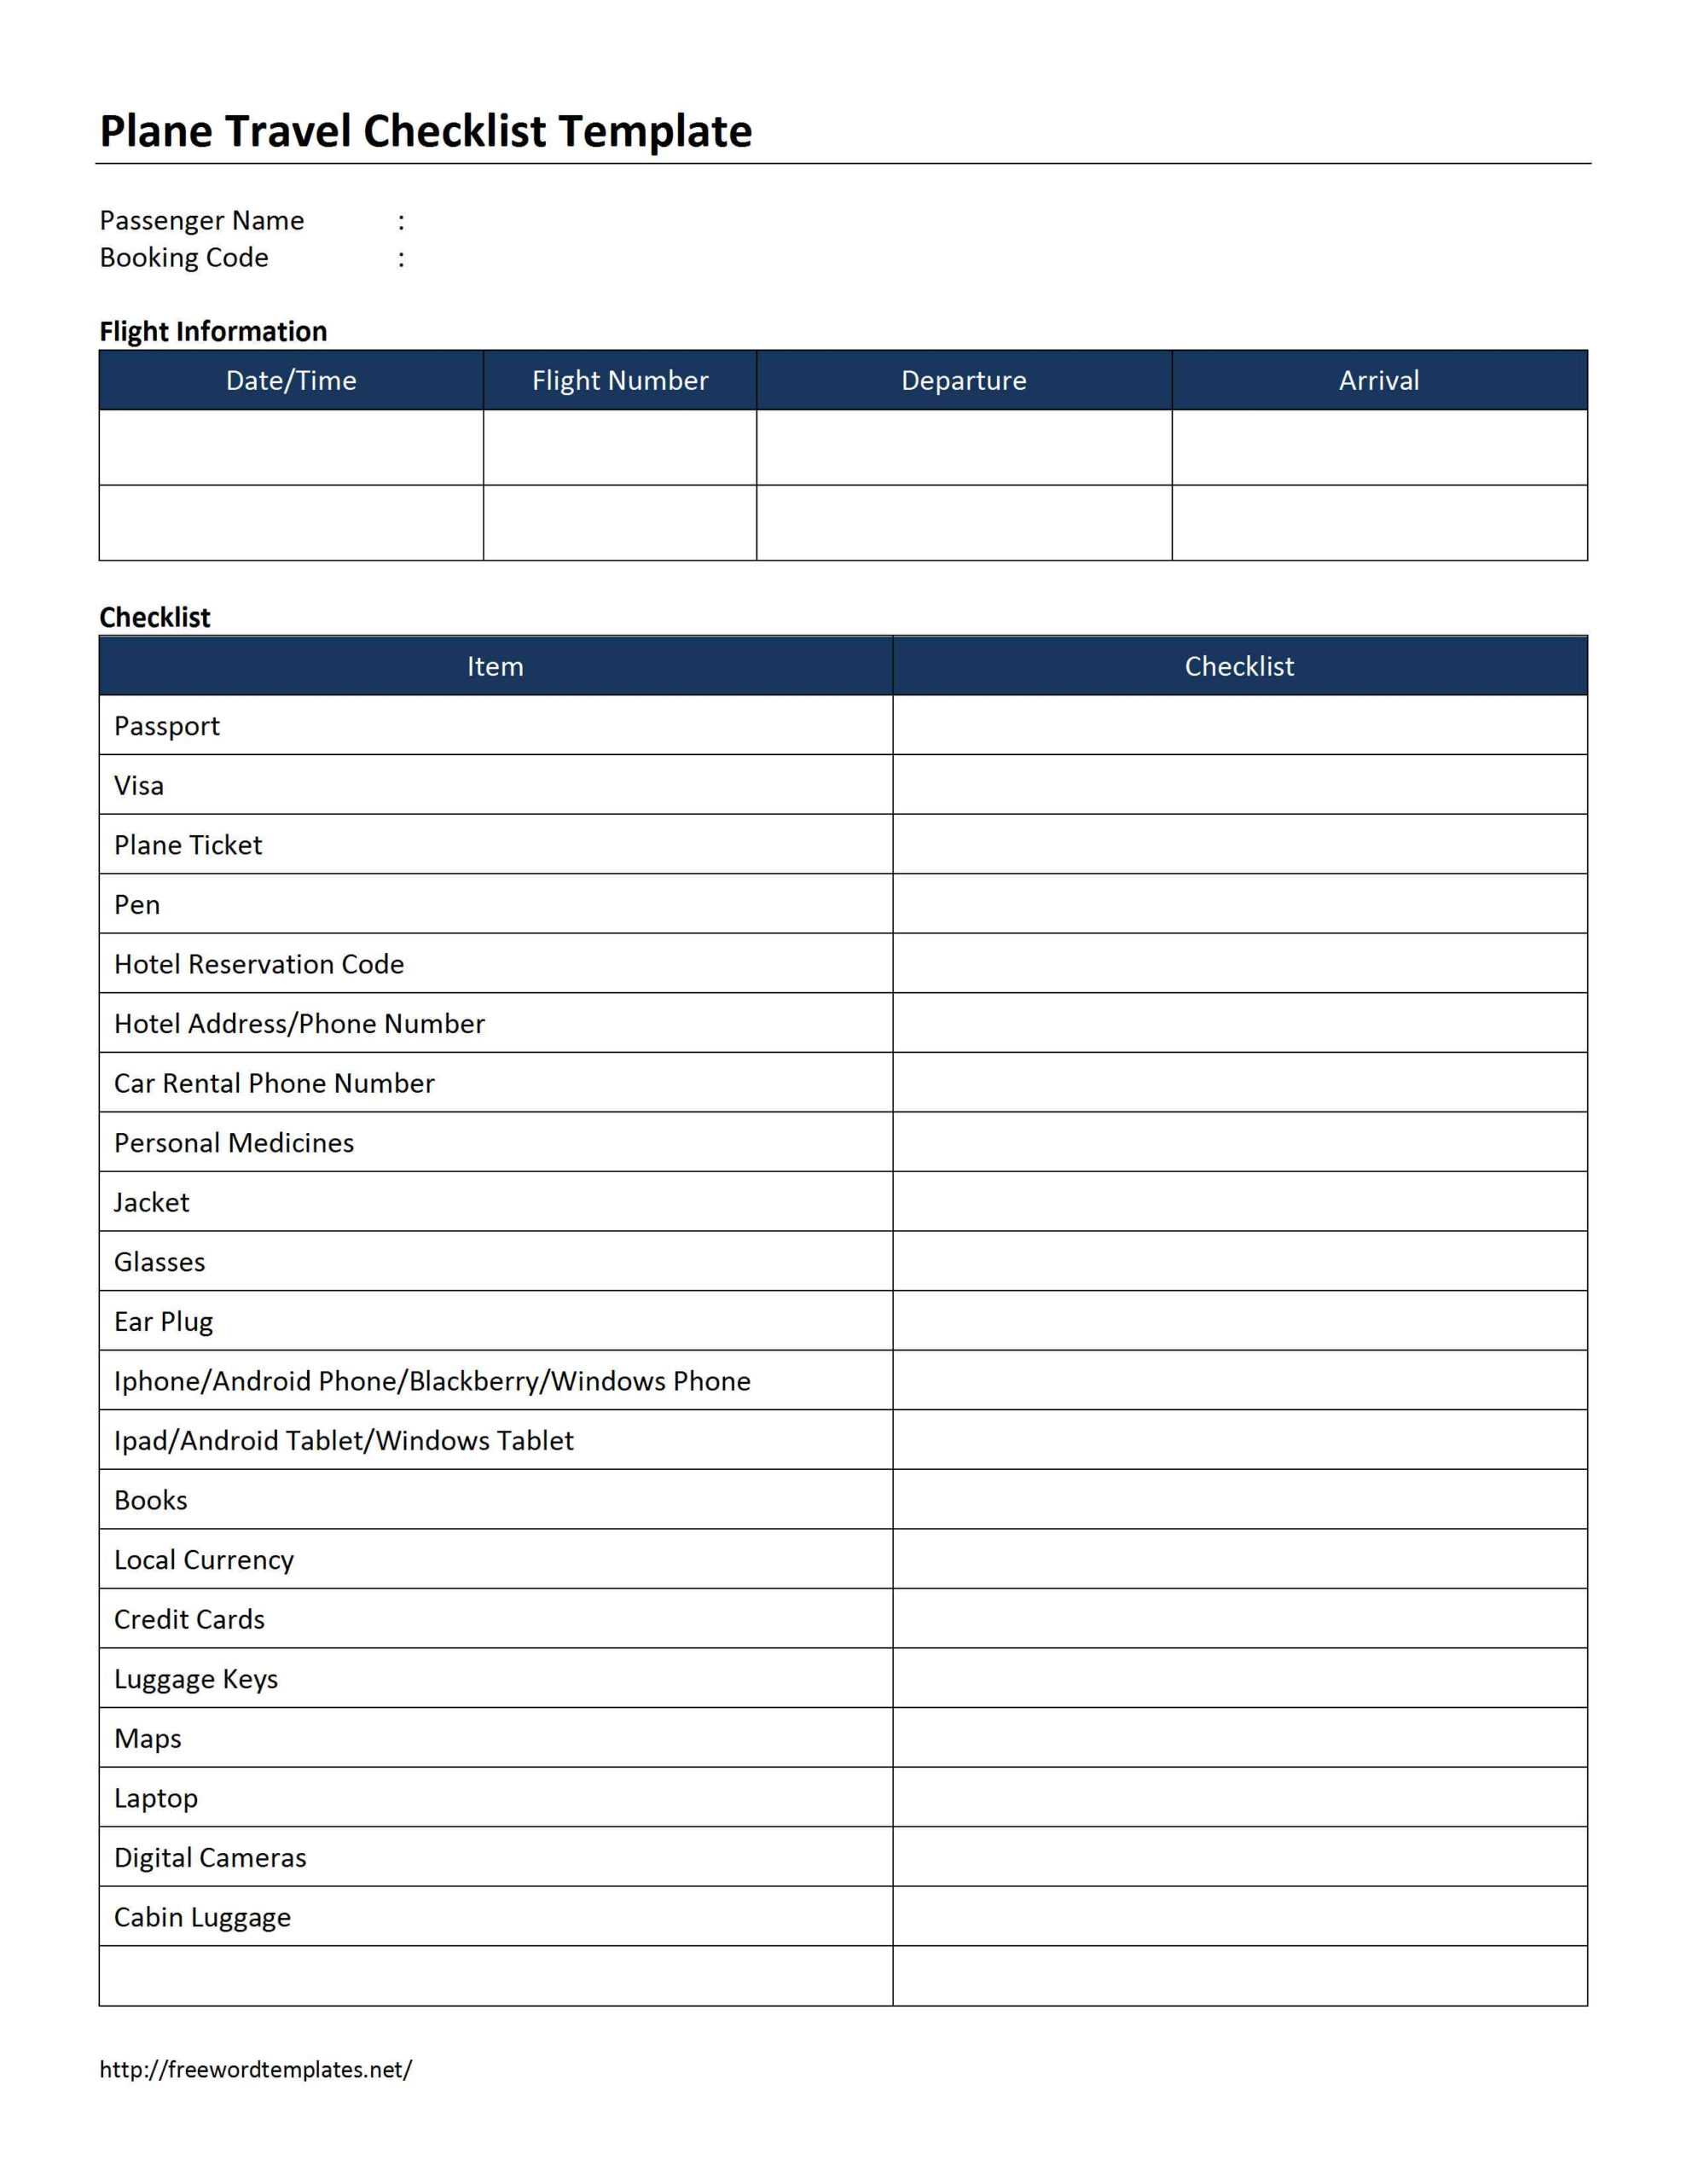 Check List Template ] – Checklist Template 03 Cheery Intended For Blank Checklist Template Word